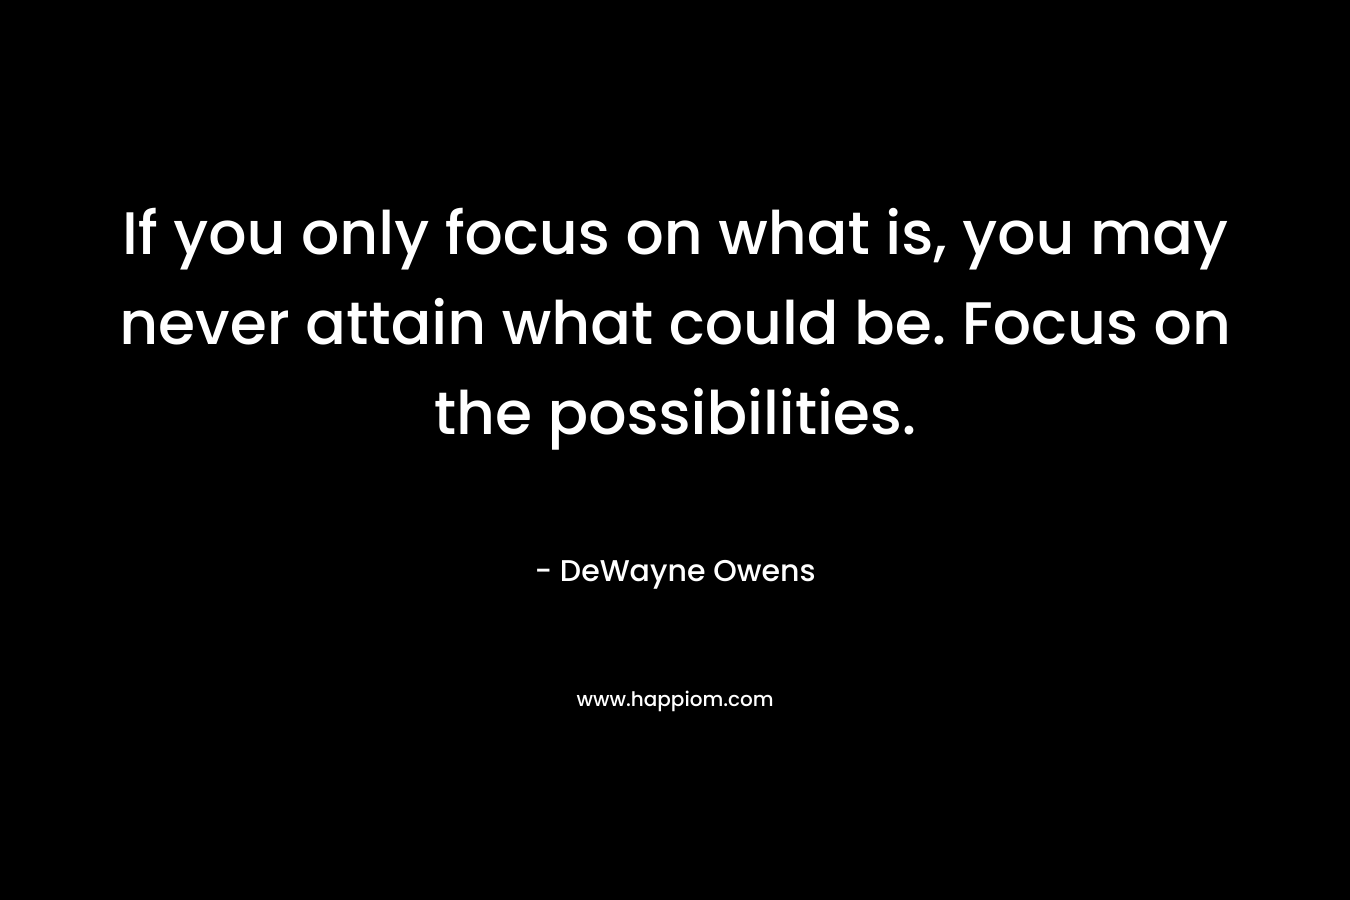 If you only focus on what is, you may never attain what could be. Focus on the possibilities. – DeWayne Owens